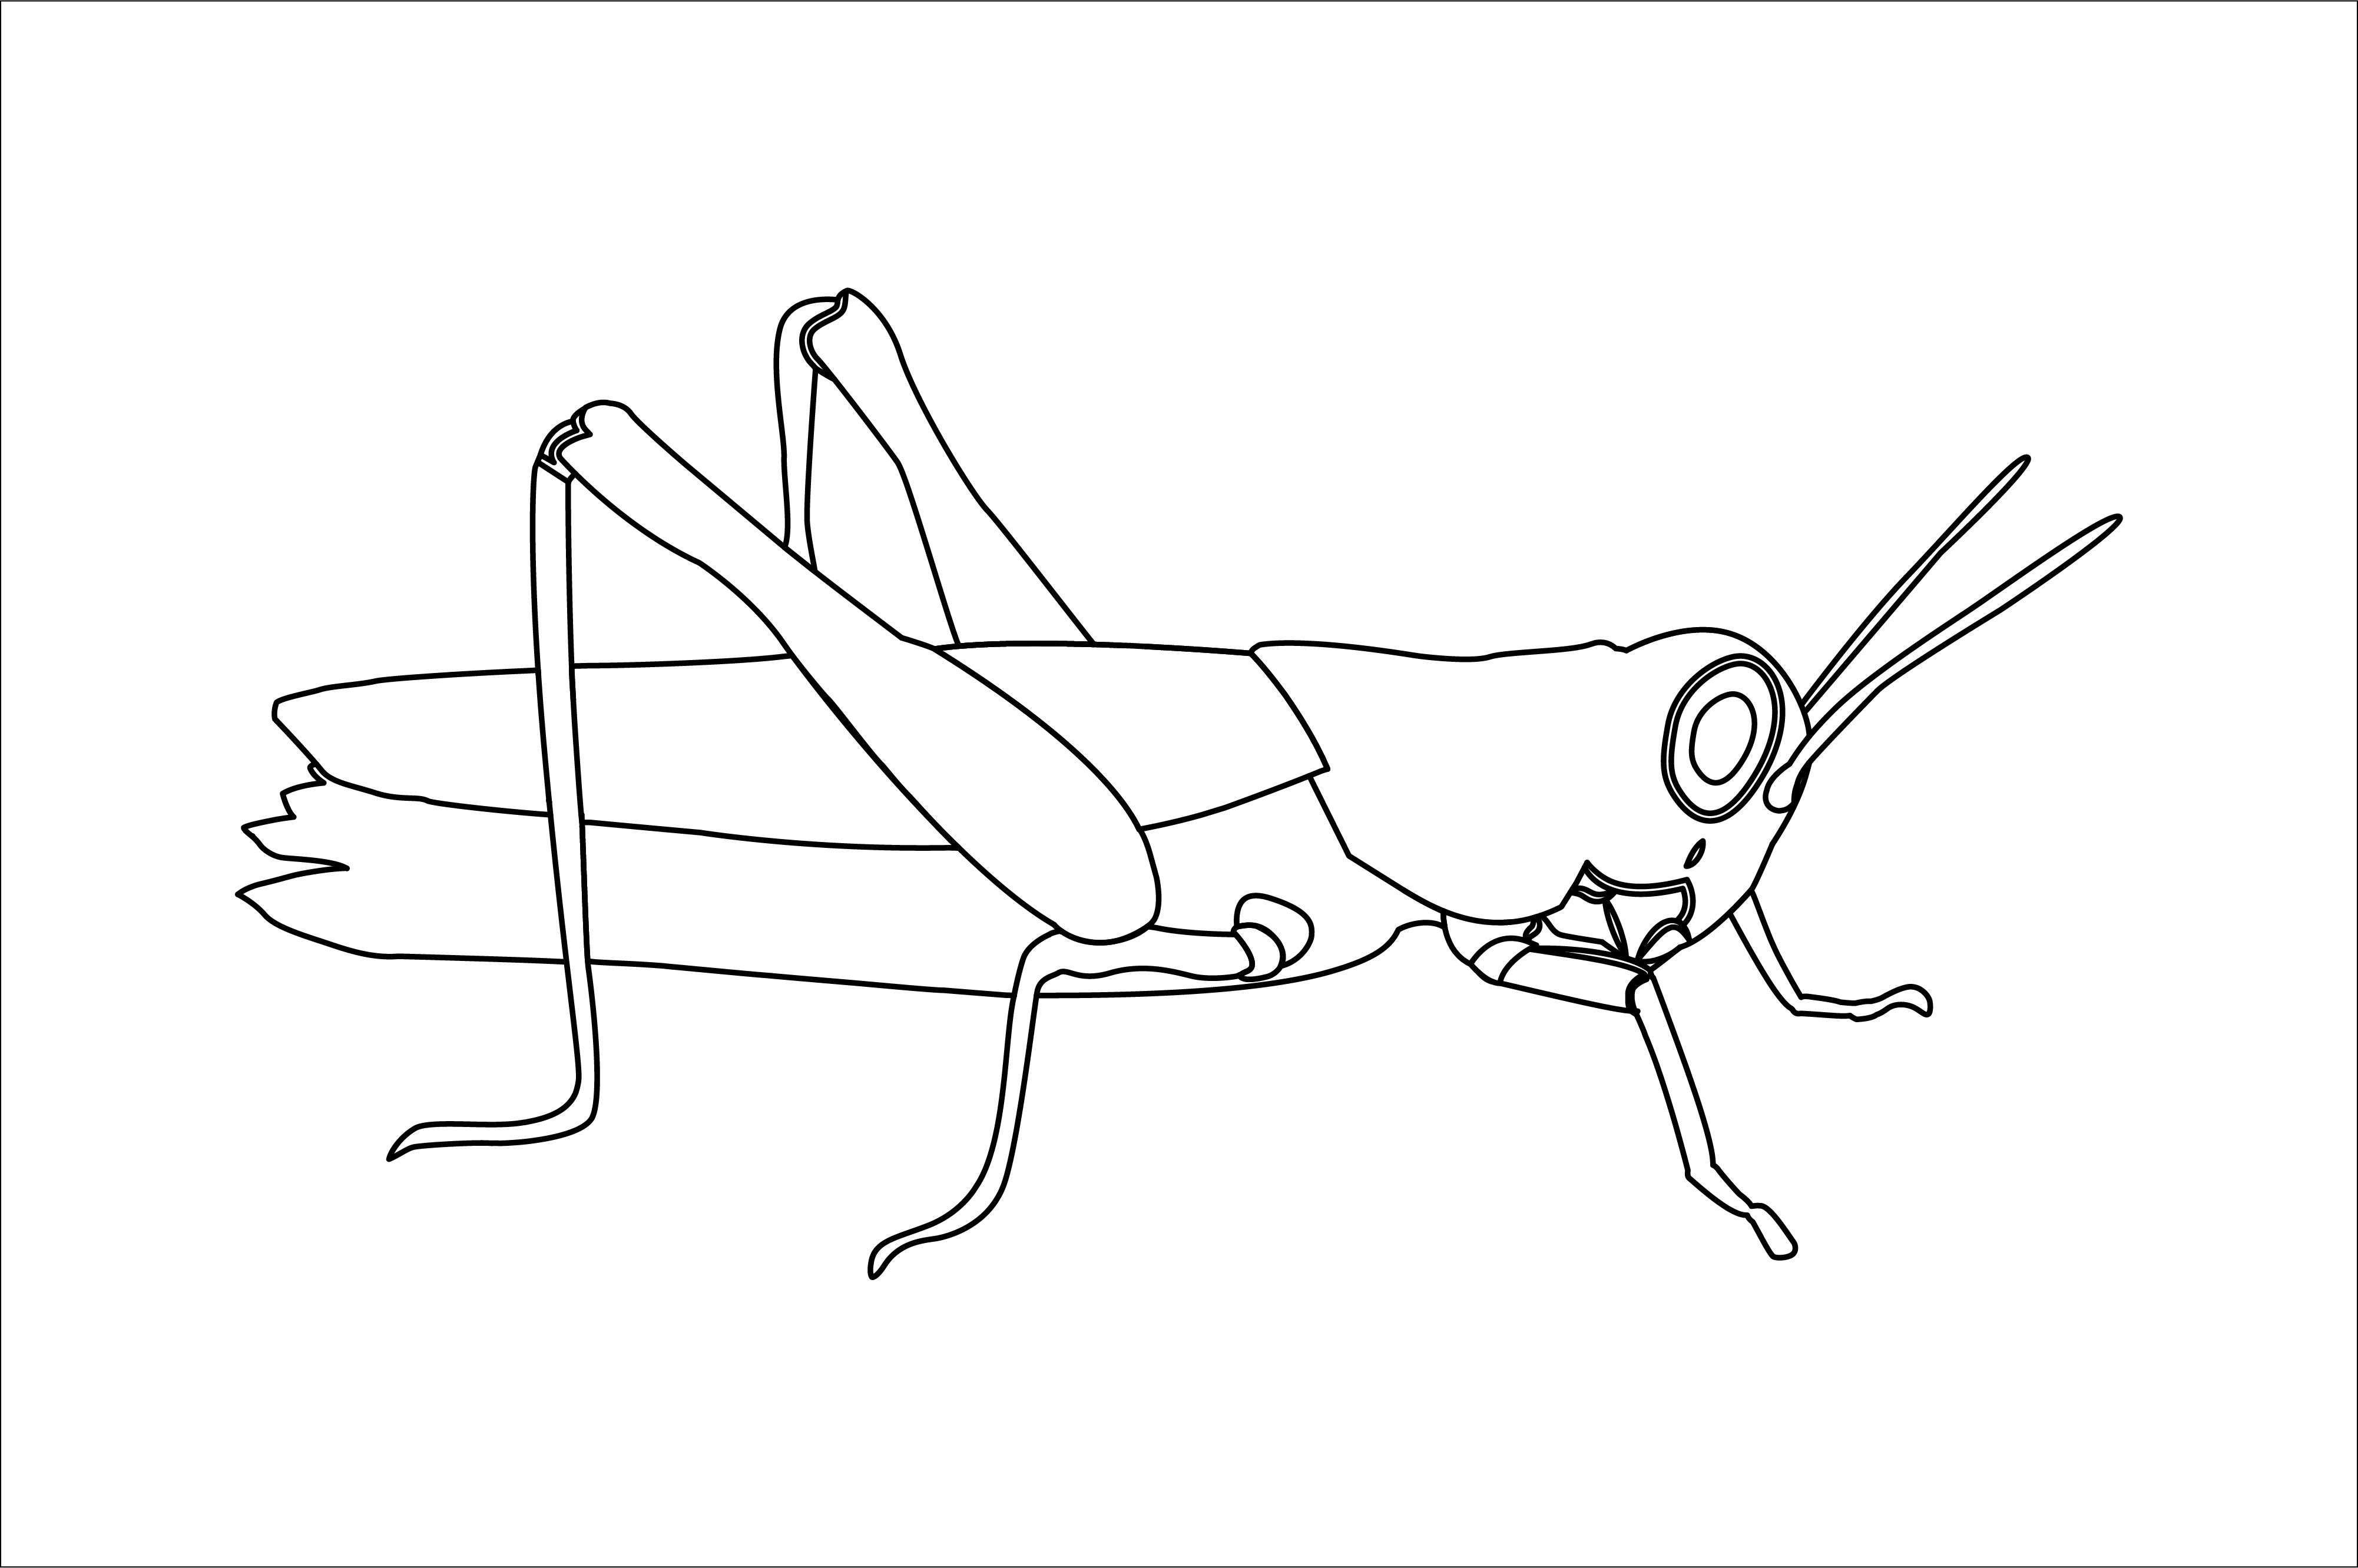 Animal Grasshoppers Icon Outline Graphic by thegoodwaral · Creative Fabrica